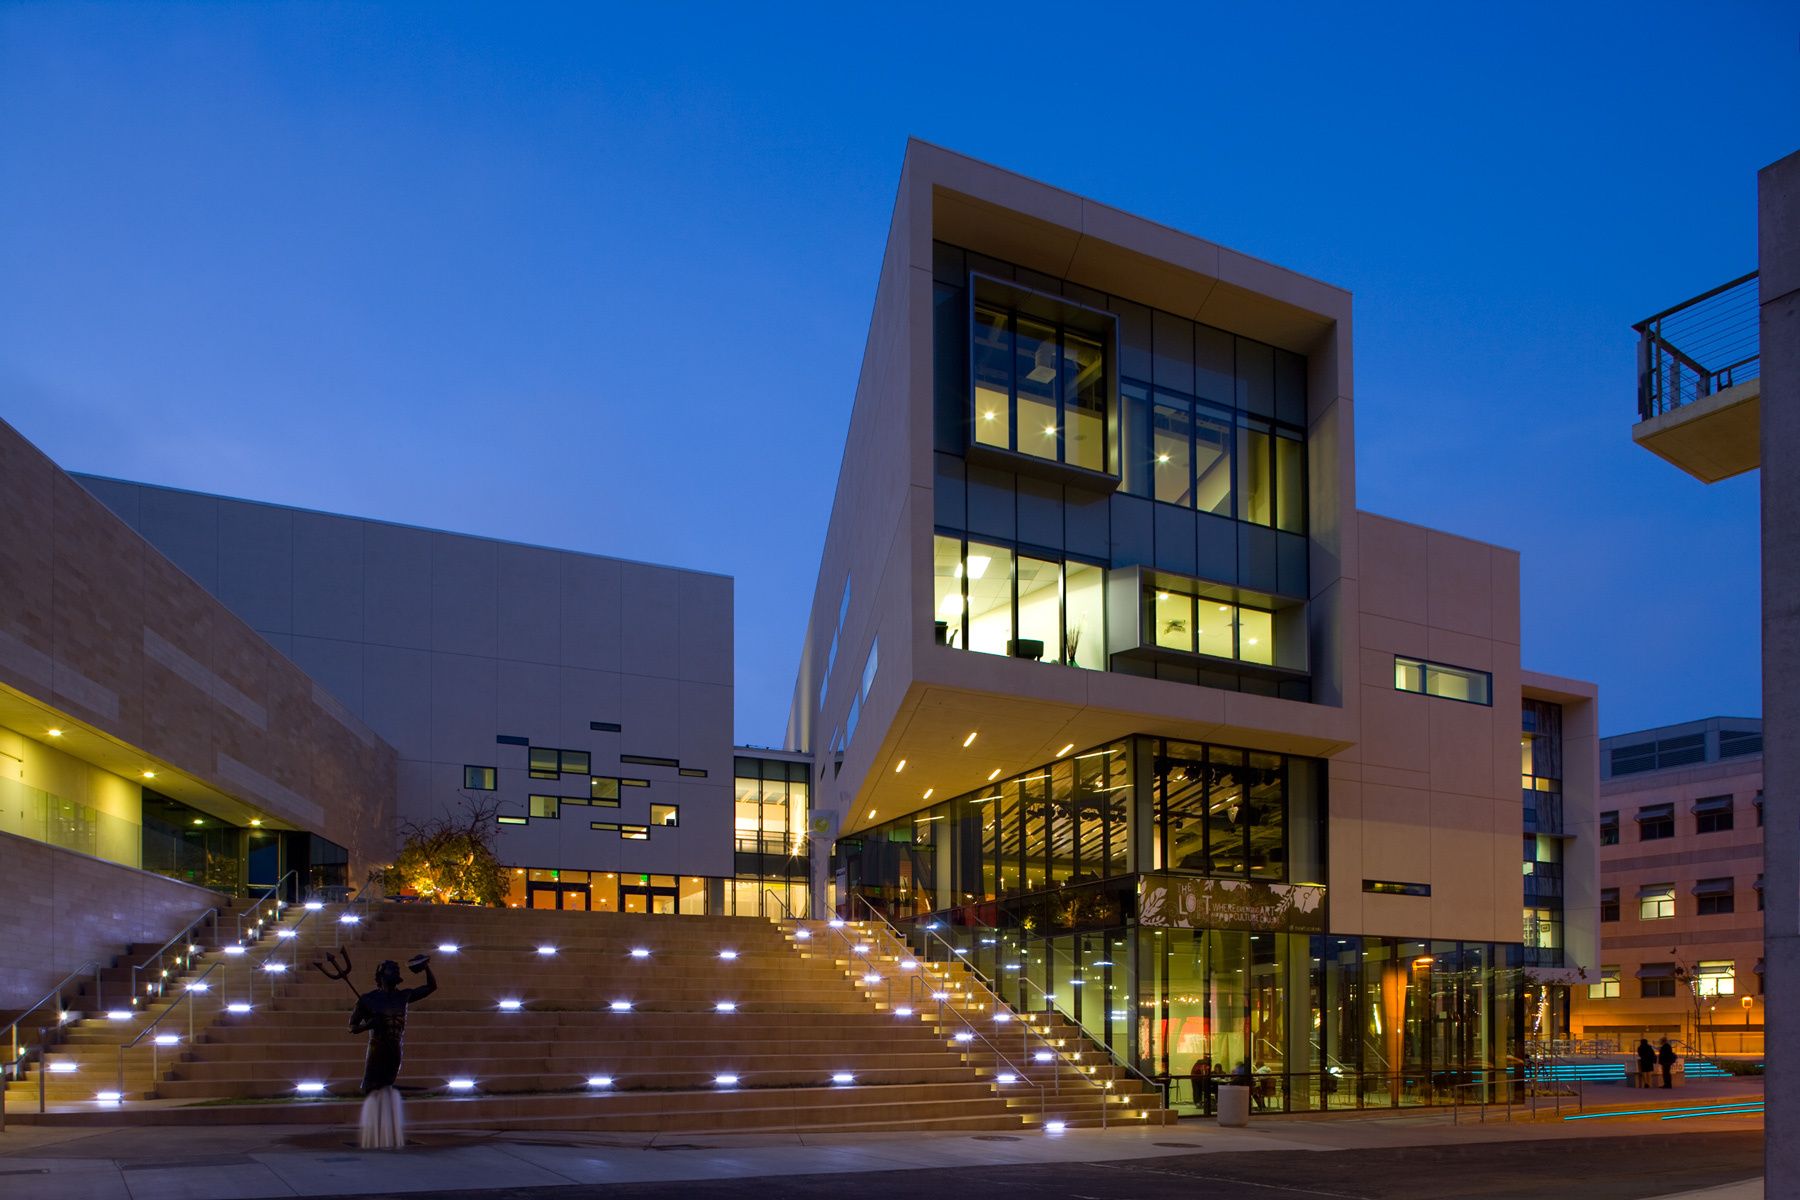 Project: University of California San Diego, Price Center EastClient: Cannon Design & UCSD Facilities Design & Construction